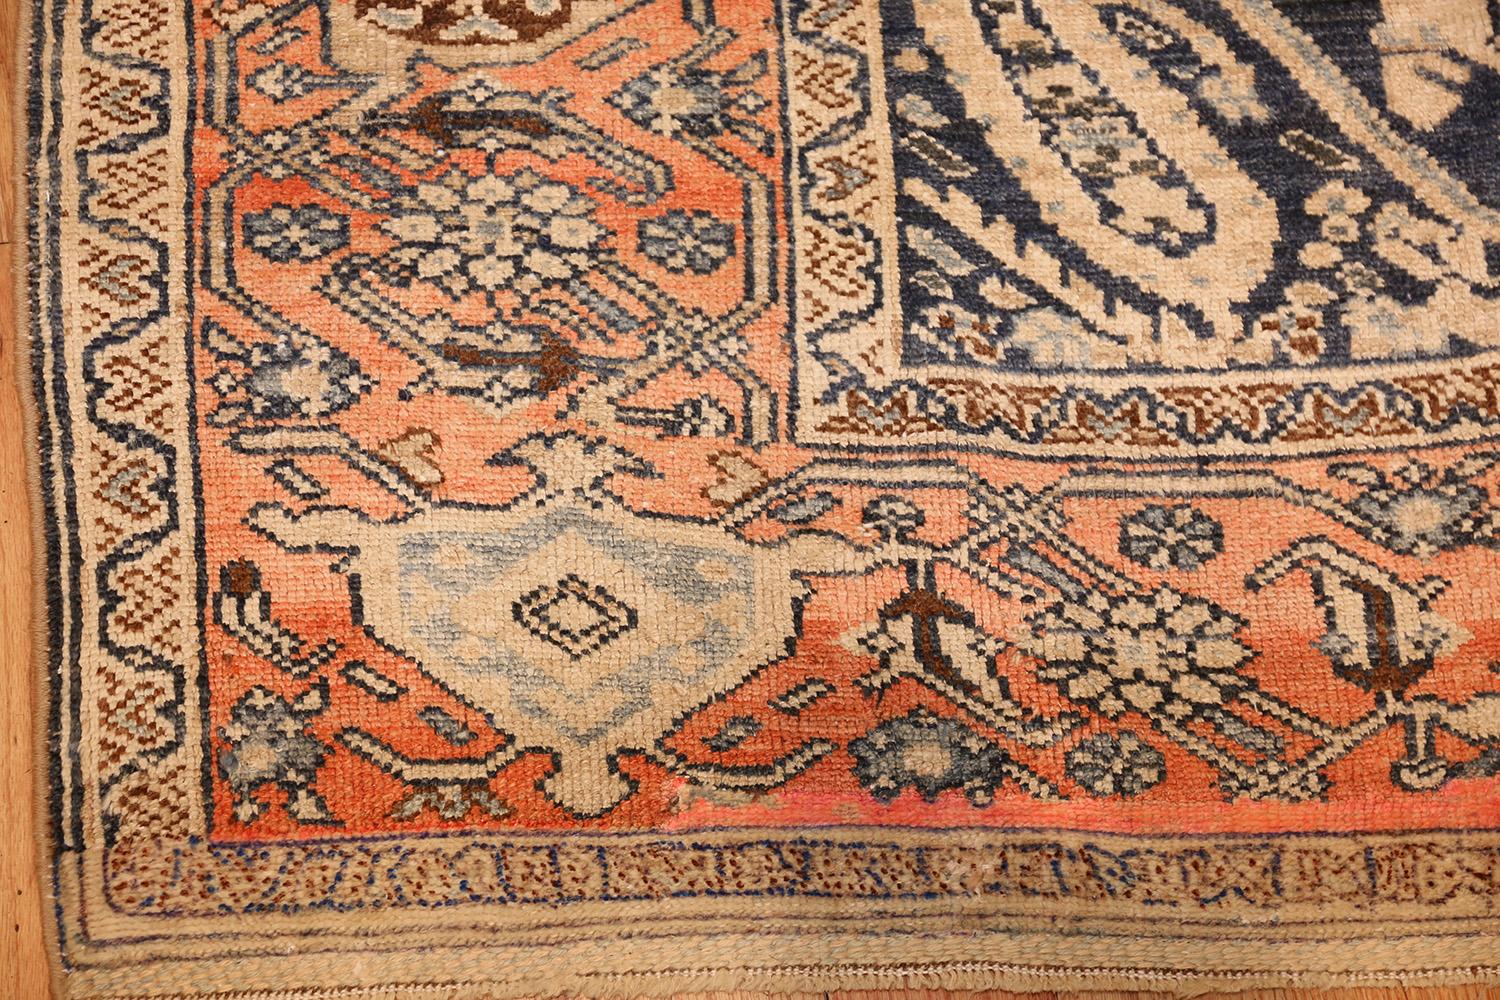 20th Century Small Antique Persian Malayer Rug